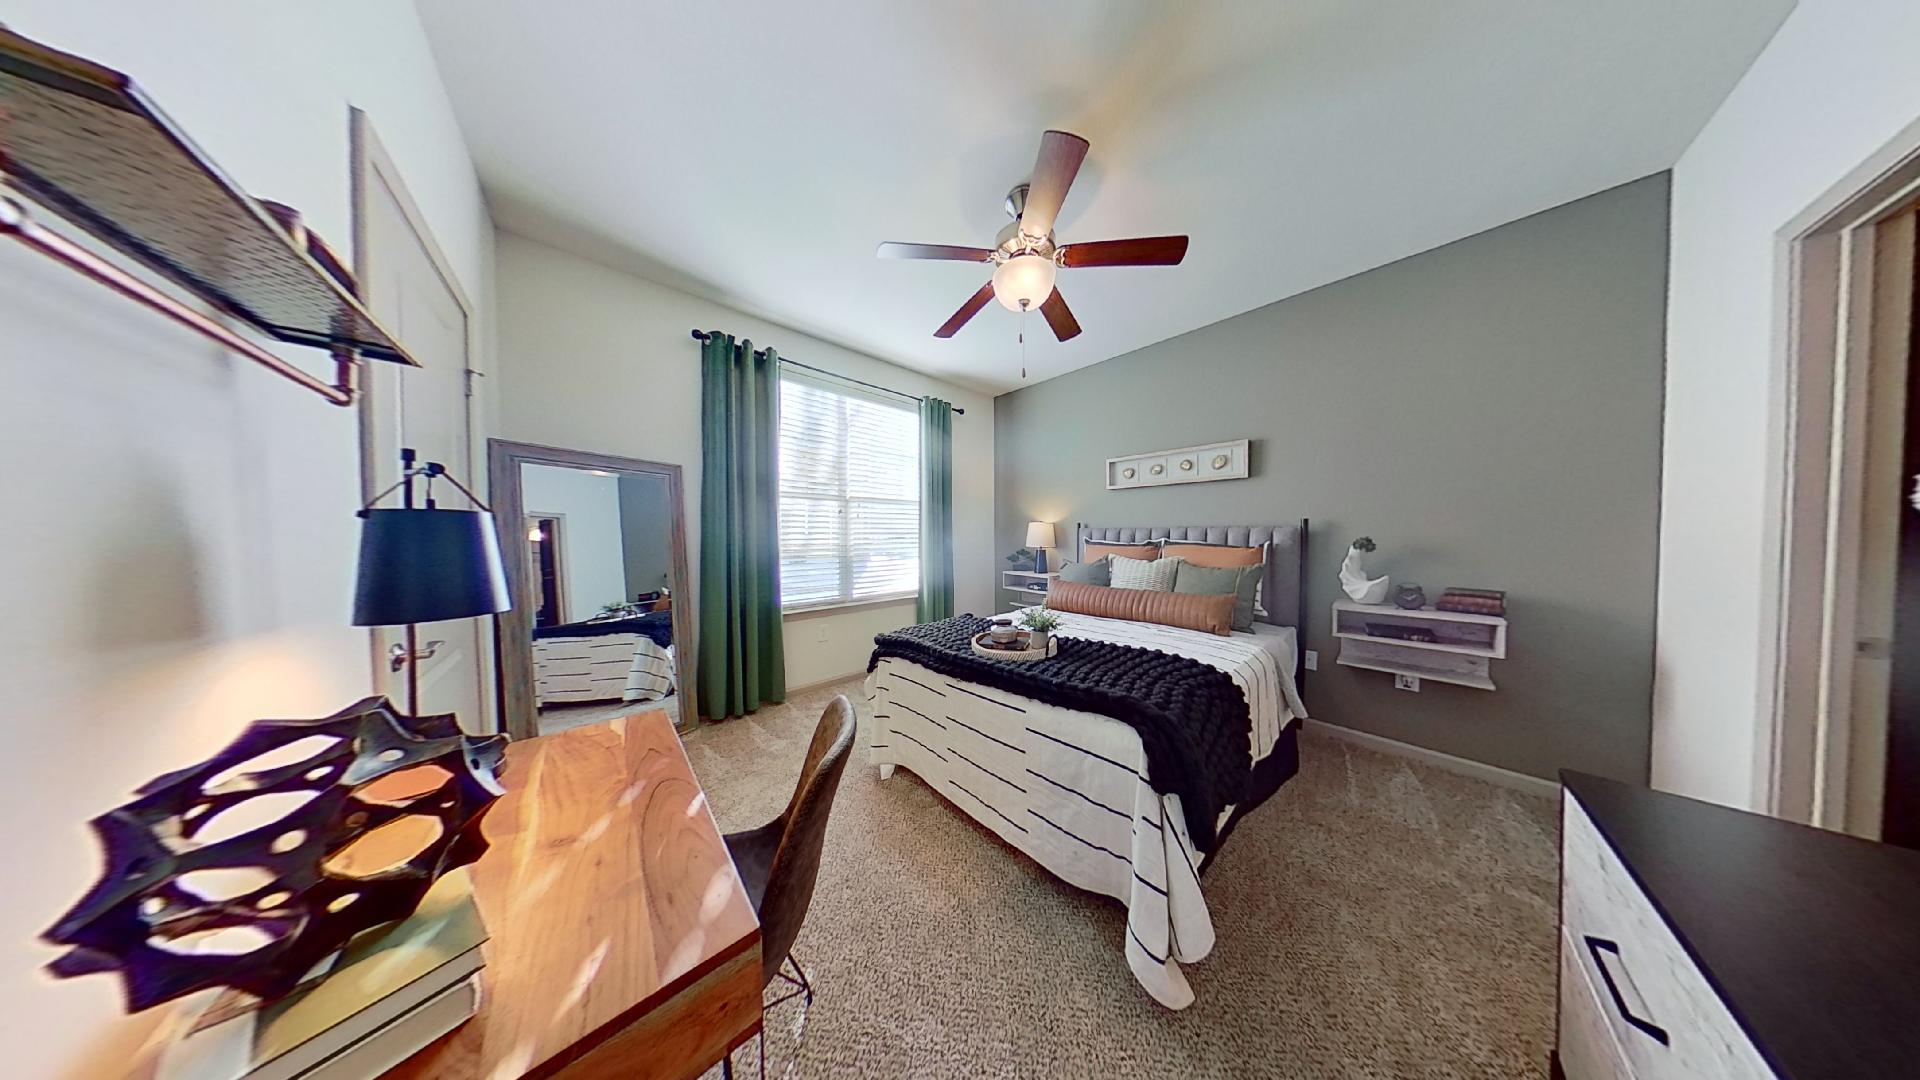 Lighted Bedroom Ceiling Fans at The Reserve at Fountainview Apartments